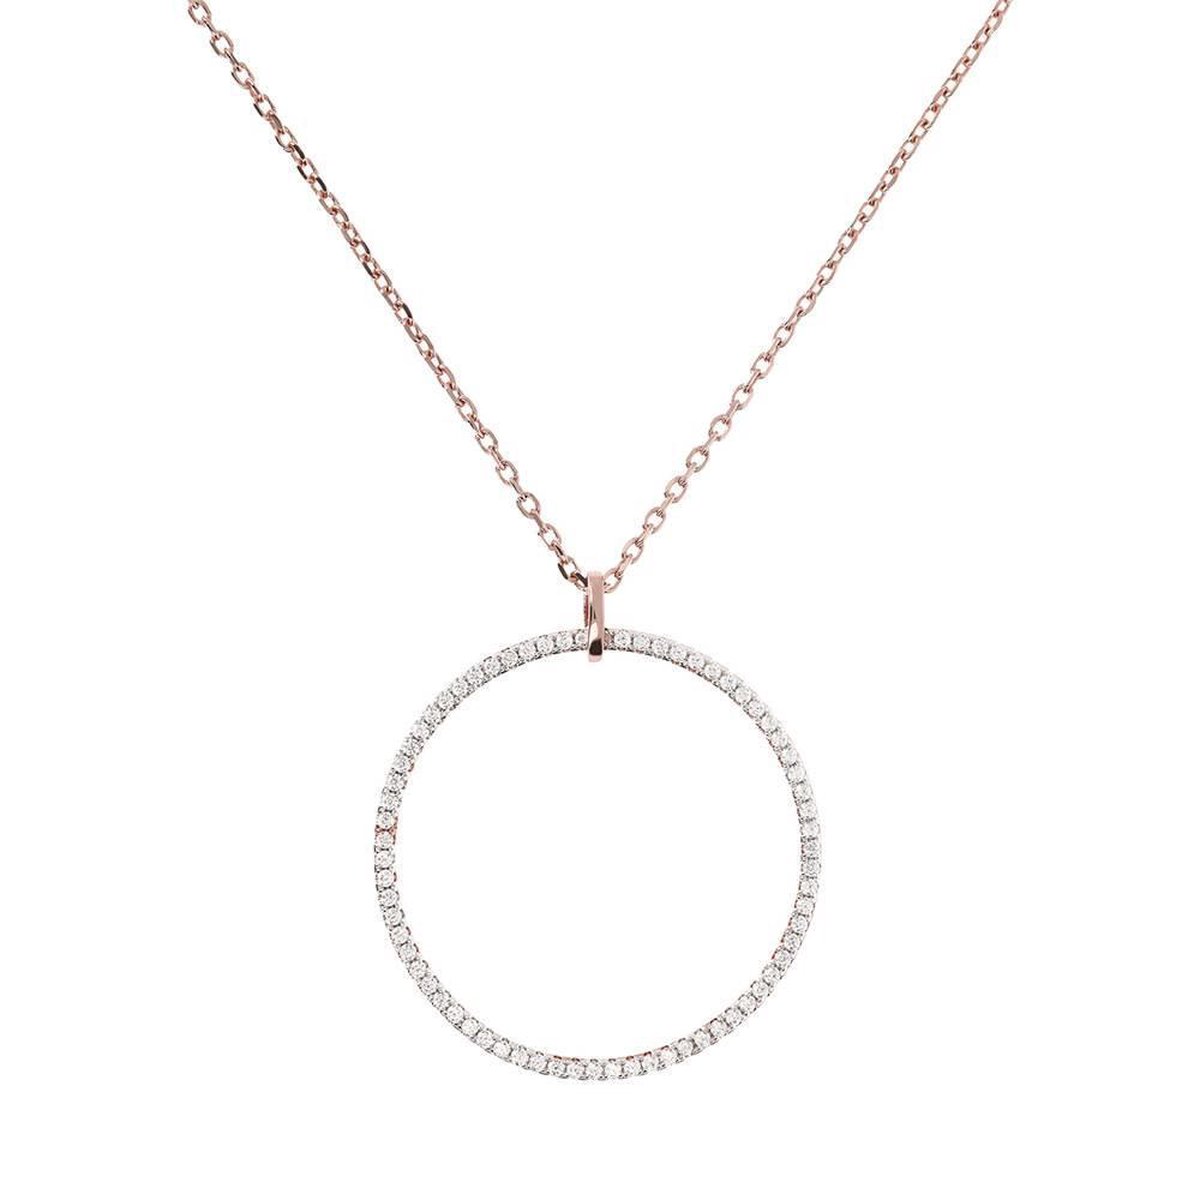 necklace with Open Circle Elements WSBZ01265.WR